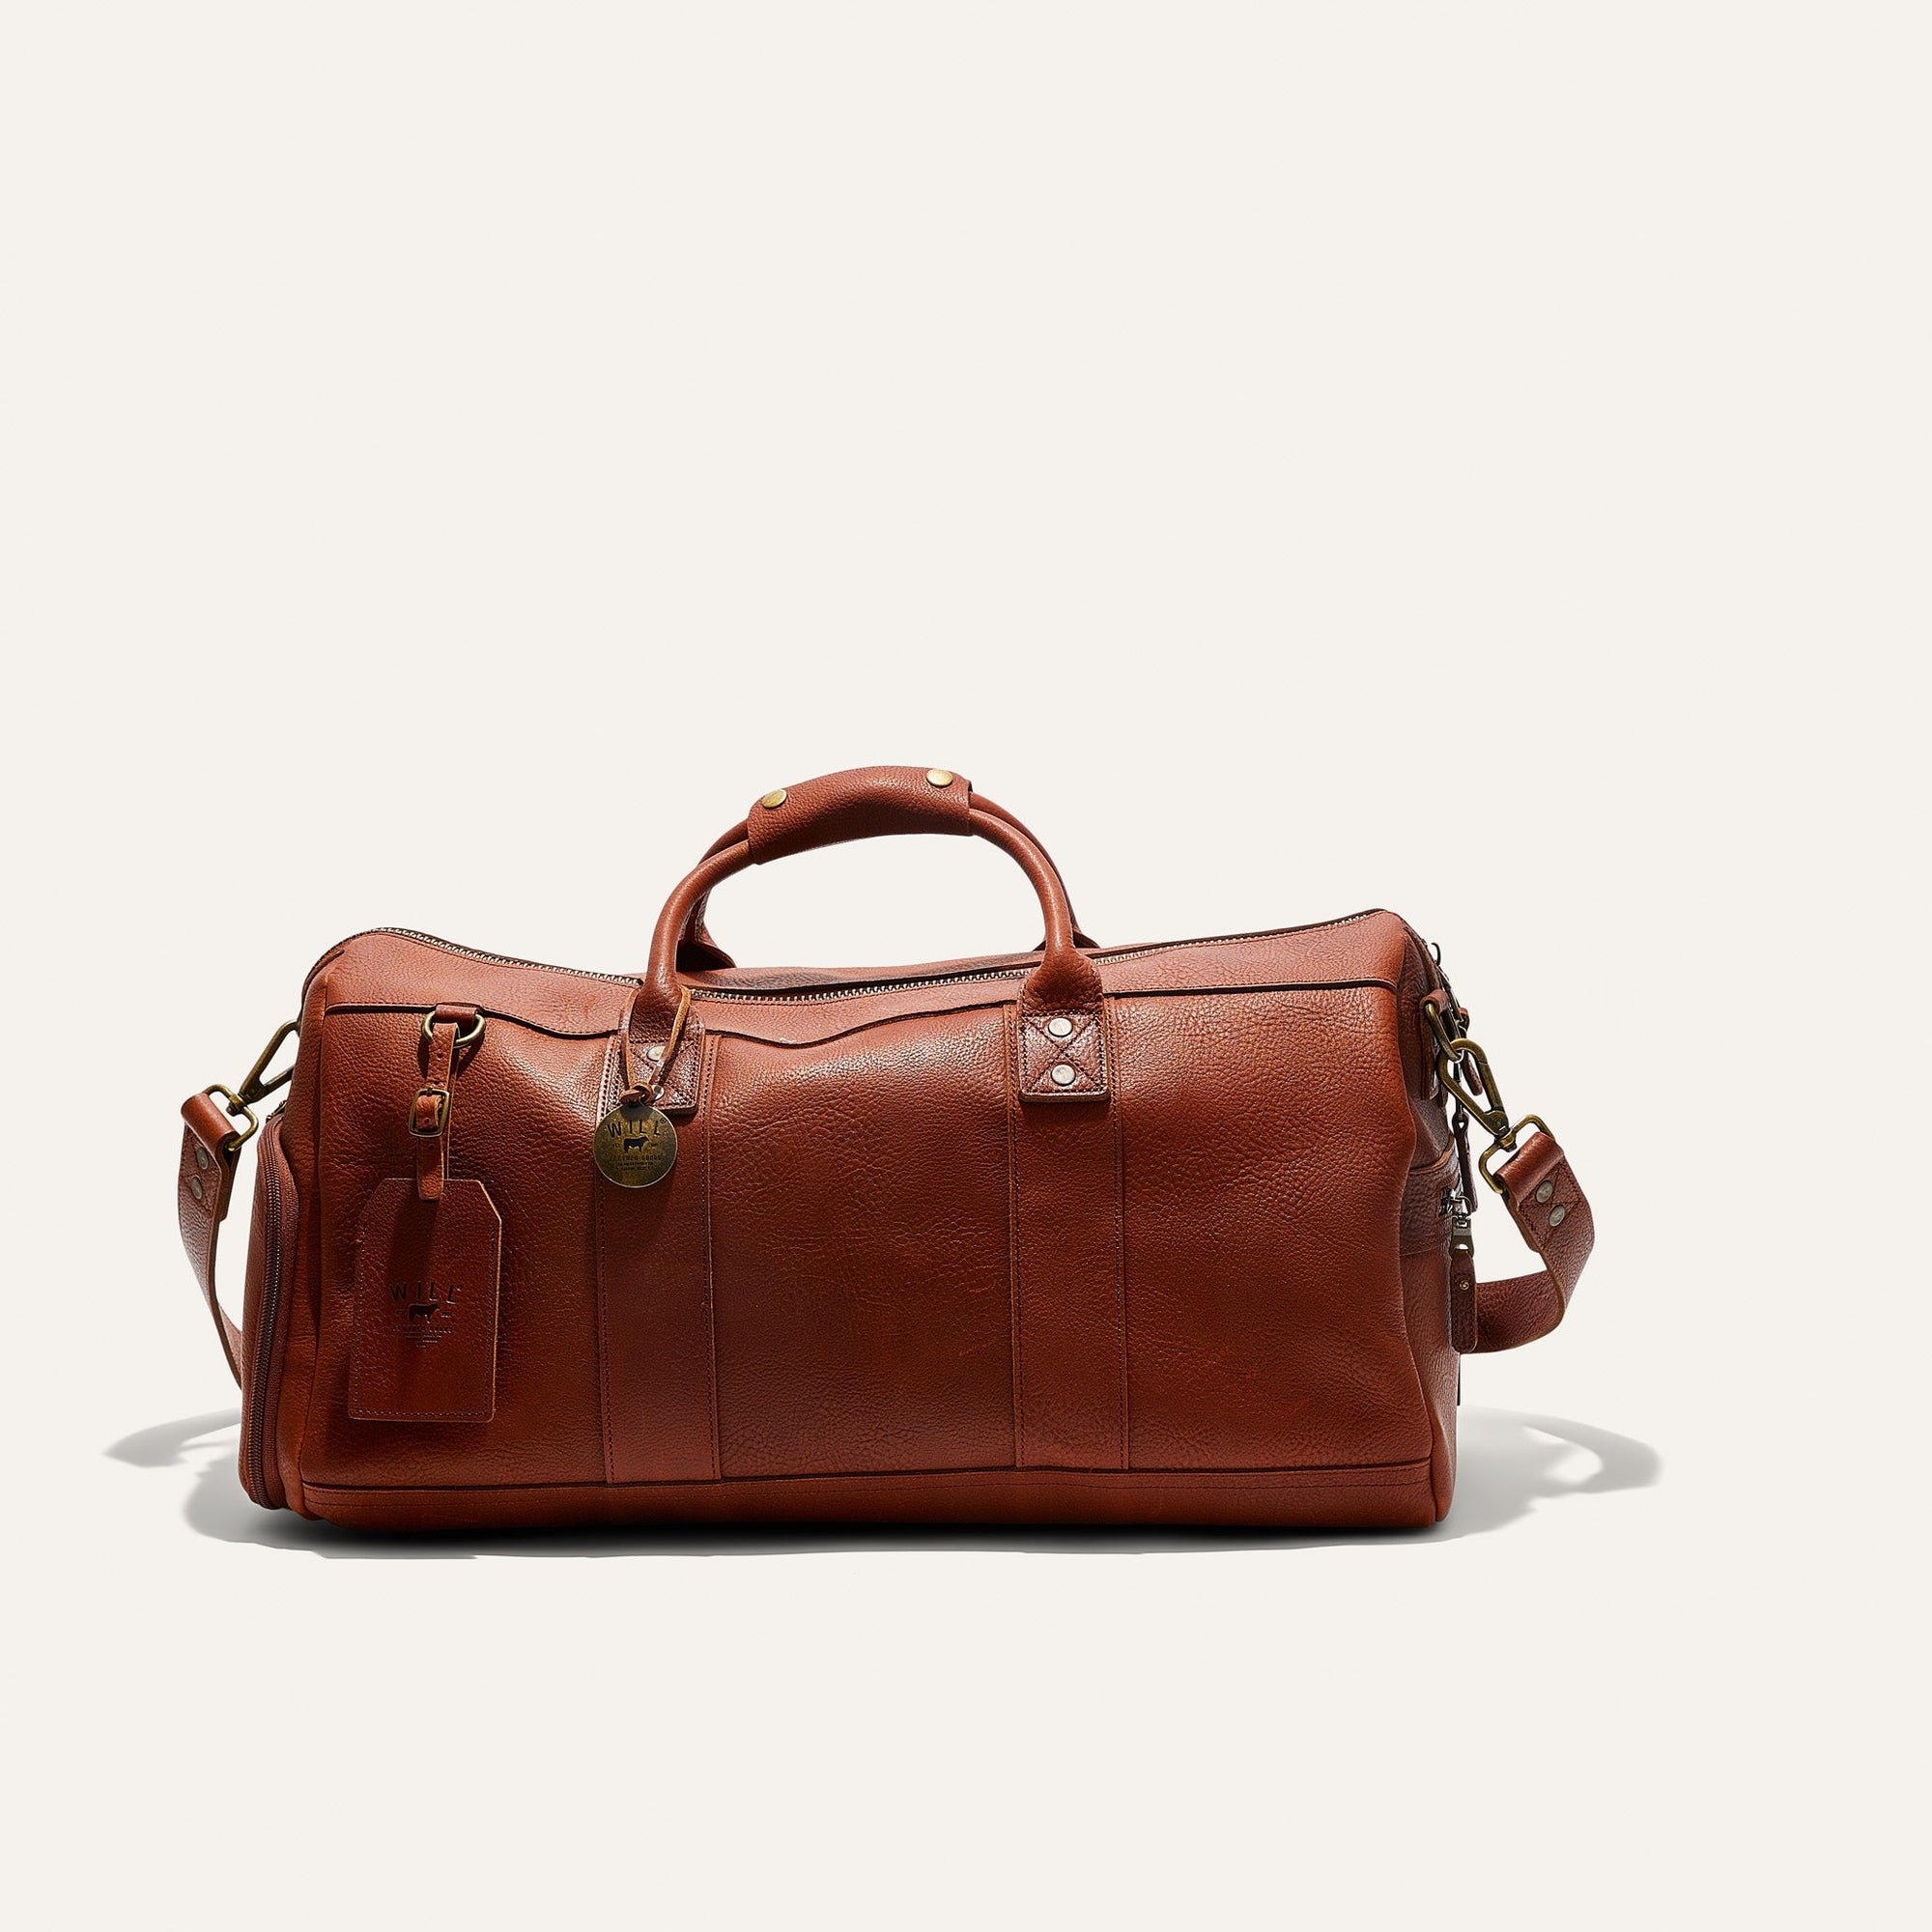 Atticus Leather Shoe Duffle in Cognac by Will Leather Goods